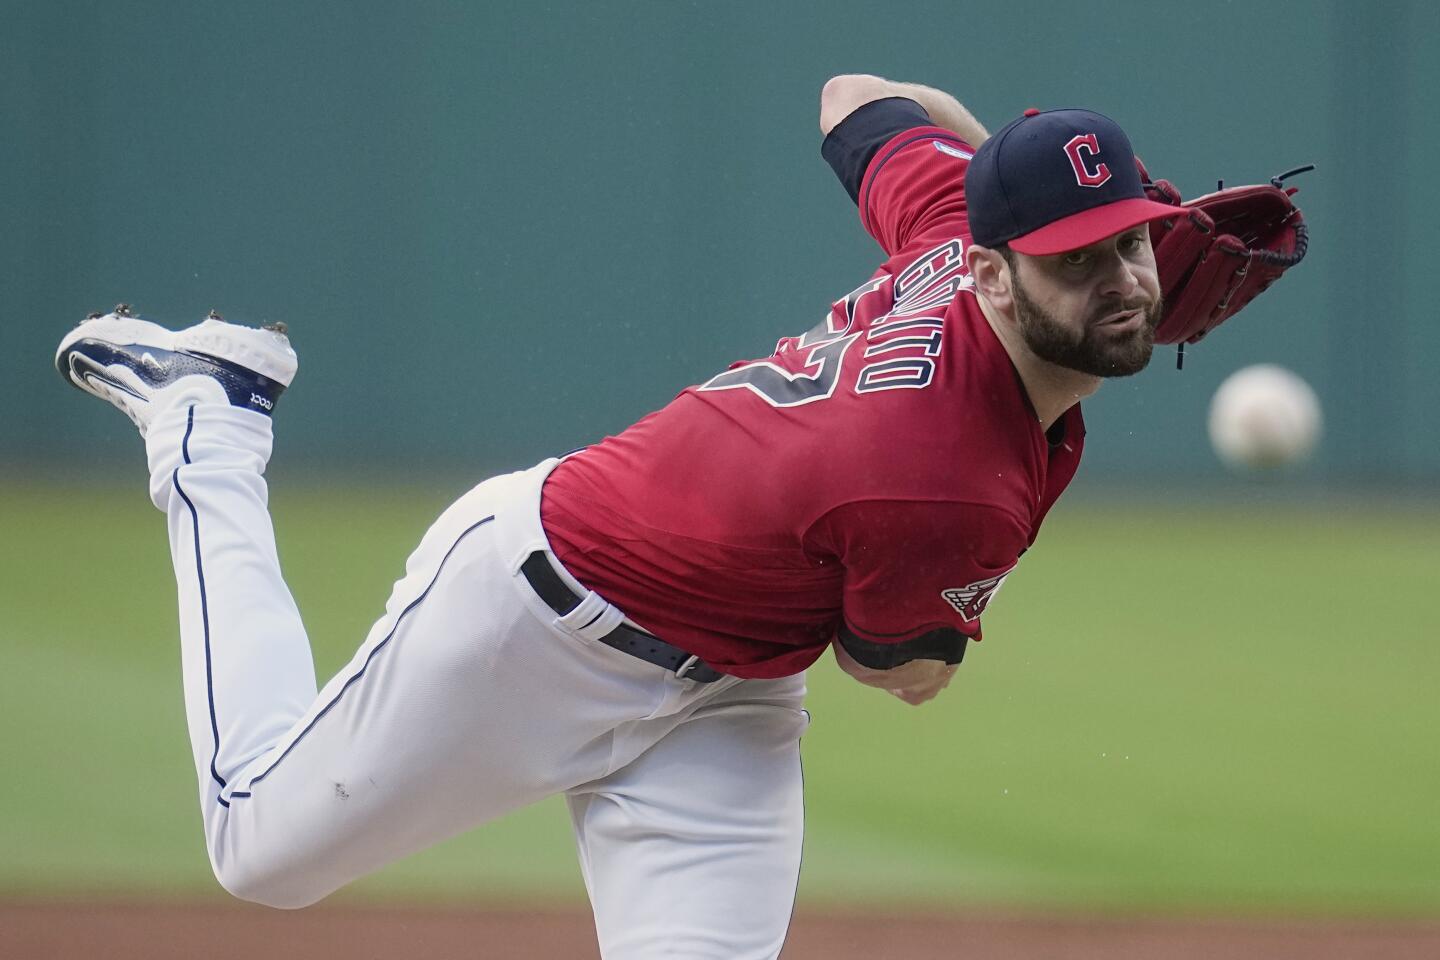 Lucas Giolito back in playoff race for Cleveland Guardians